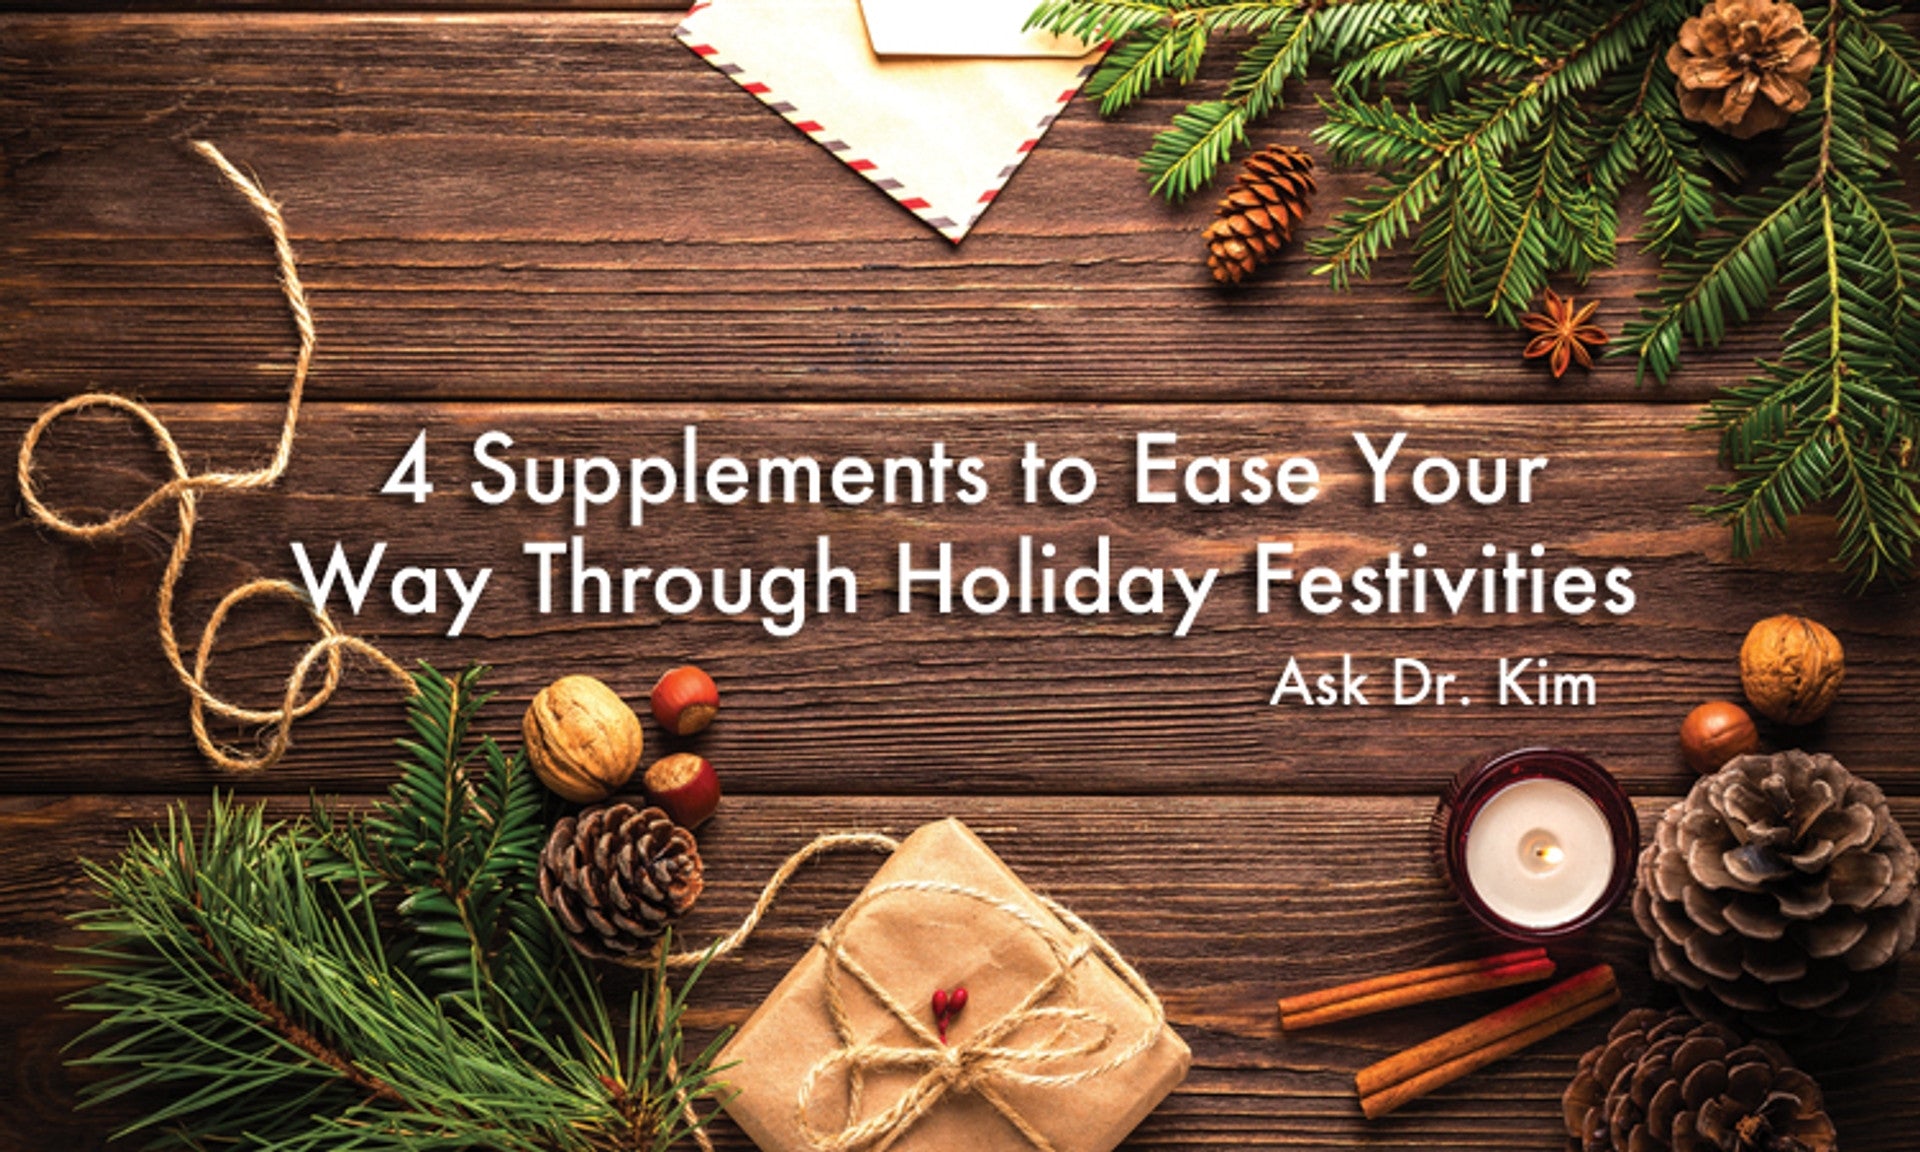 4 Supplements to Ease Your Way Through Holiday Festivities